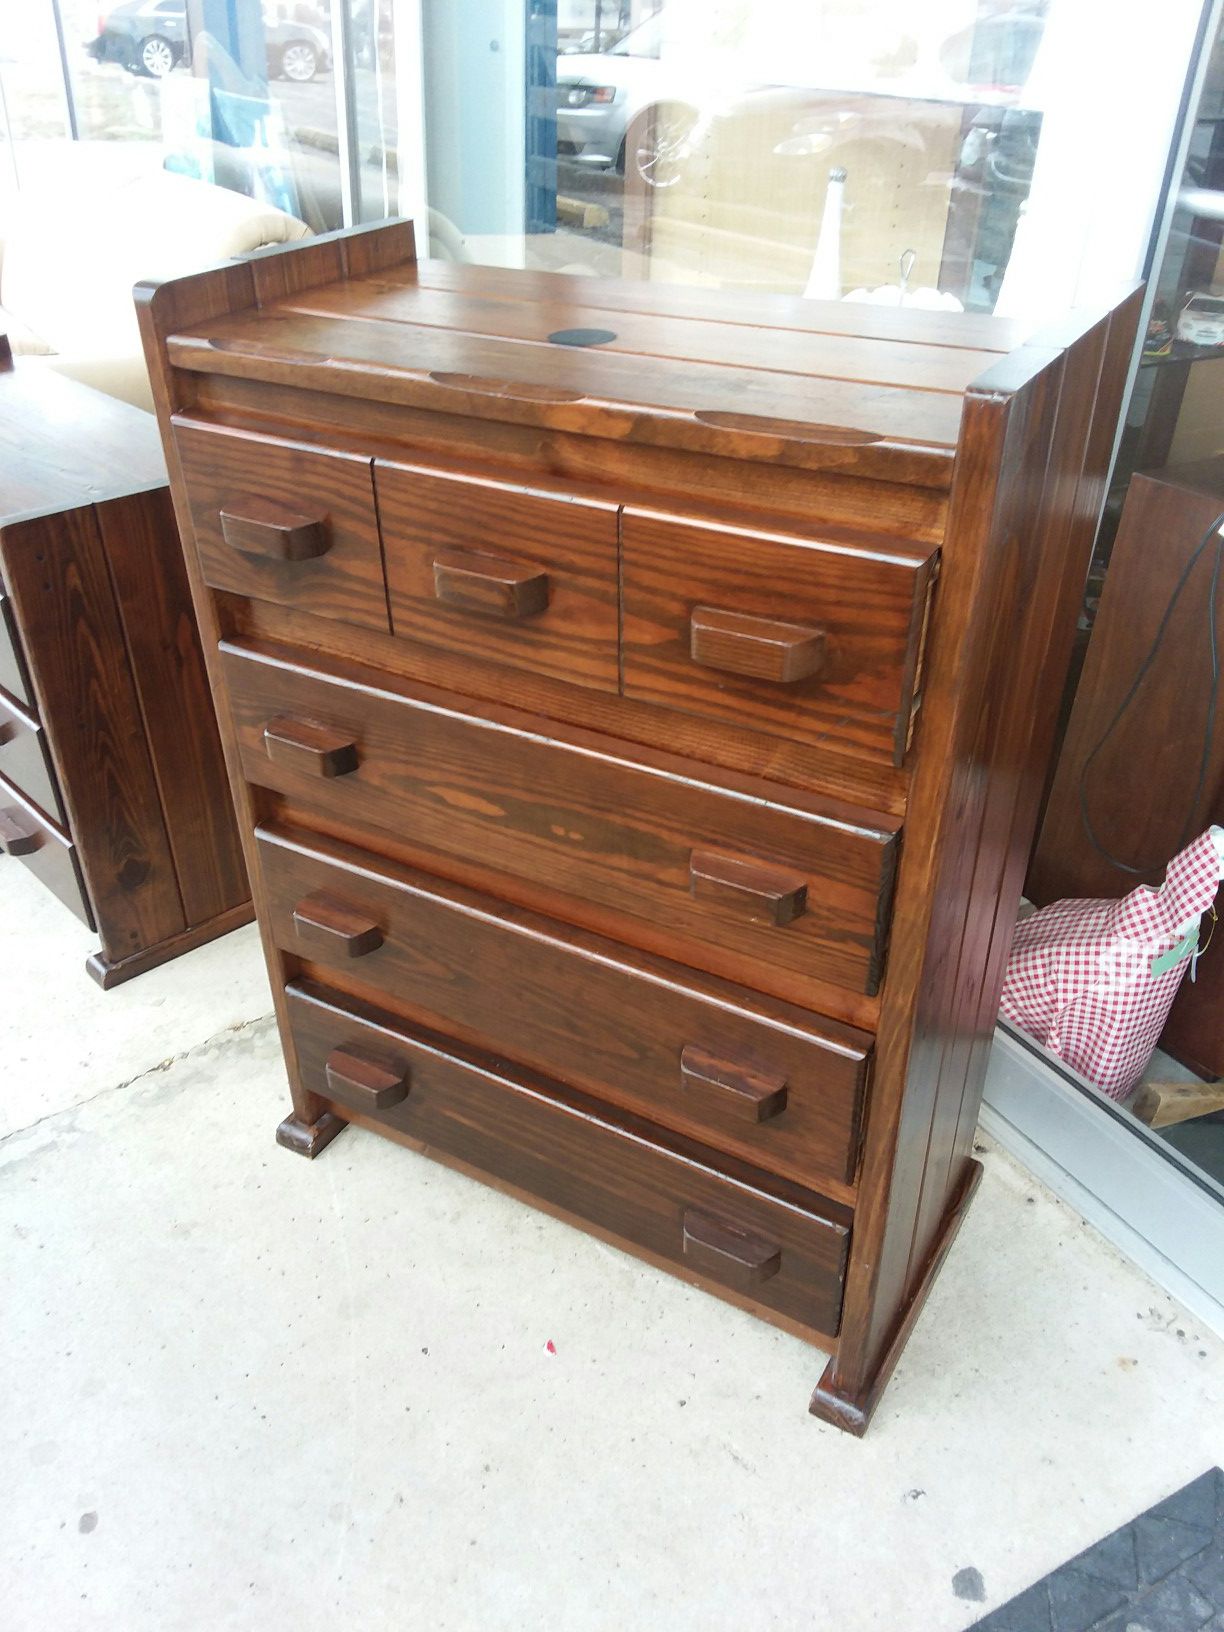 Solid wood dresser NO IKEA JUNK!😉 credit cards accepted! Have matching desk available 😲